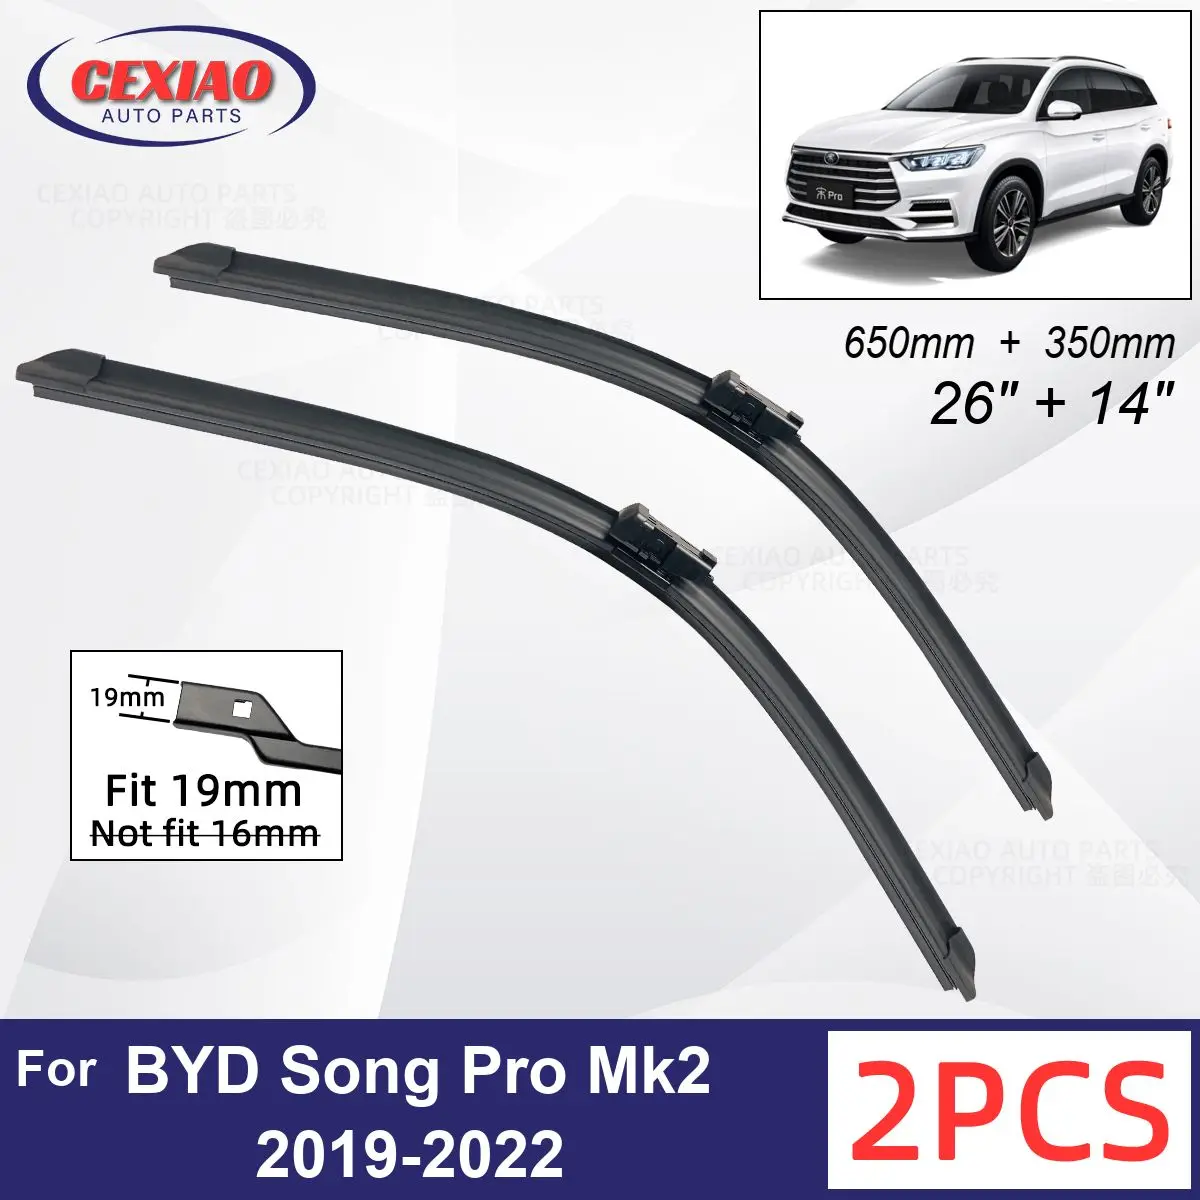 

Car Wiper For BYD Song Pro Mk2 EV DM 2019-2022 Front Wiper Blades Soft Rubber Windscreen Wipers Auto Windshield 650mm + 350mm